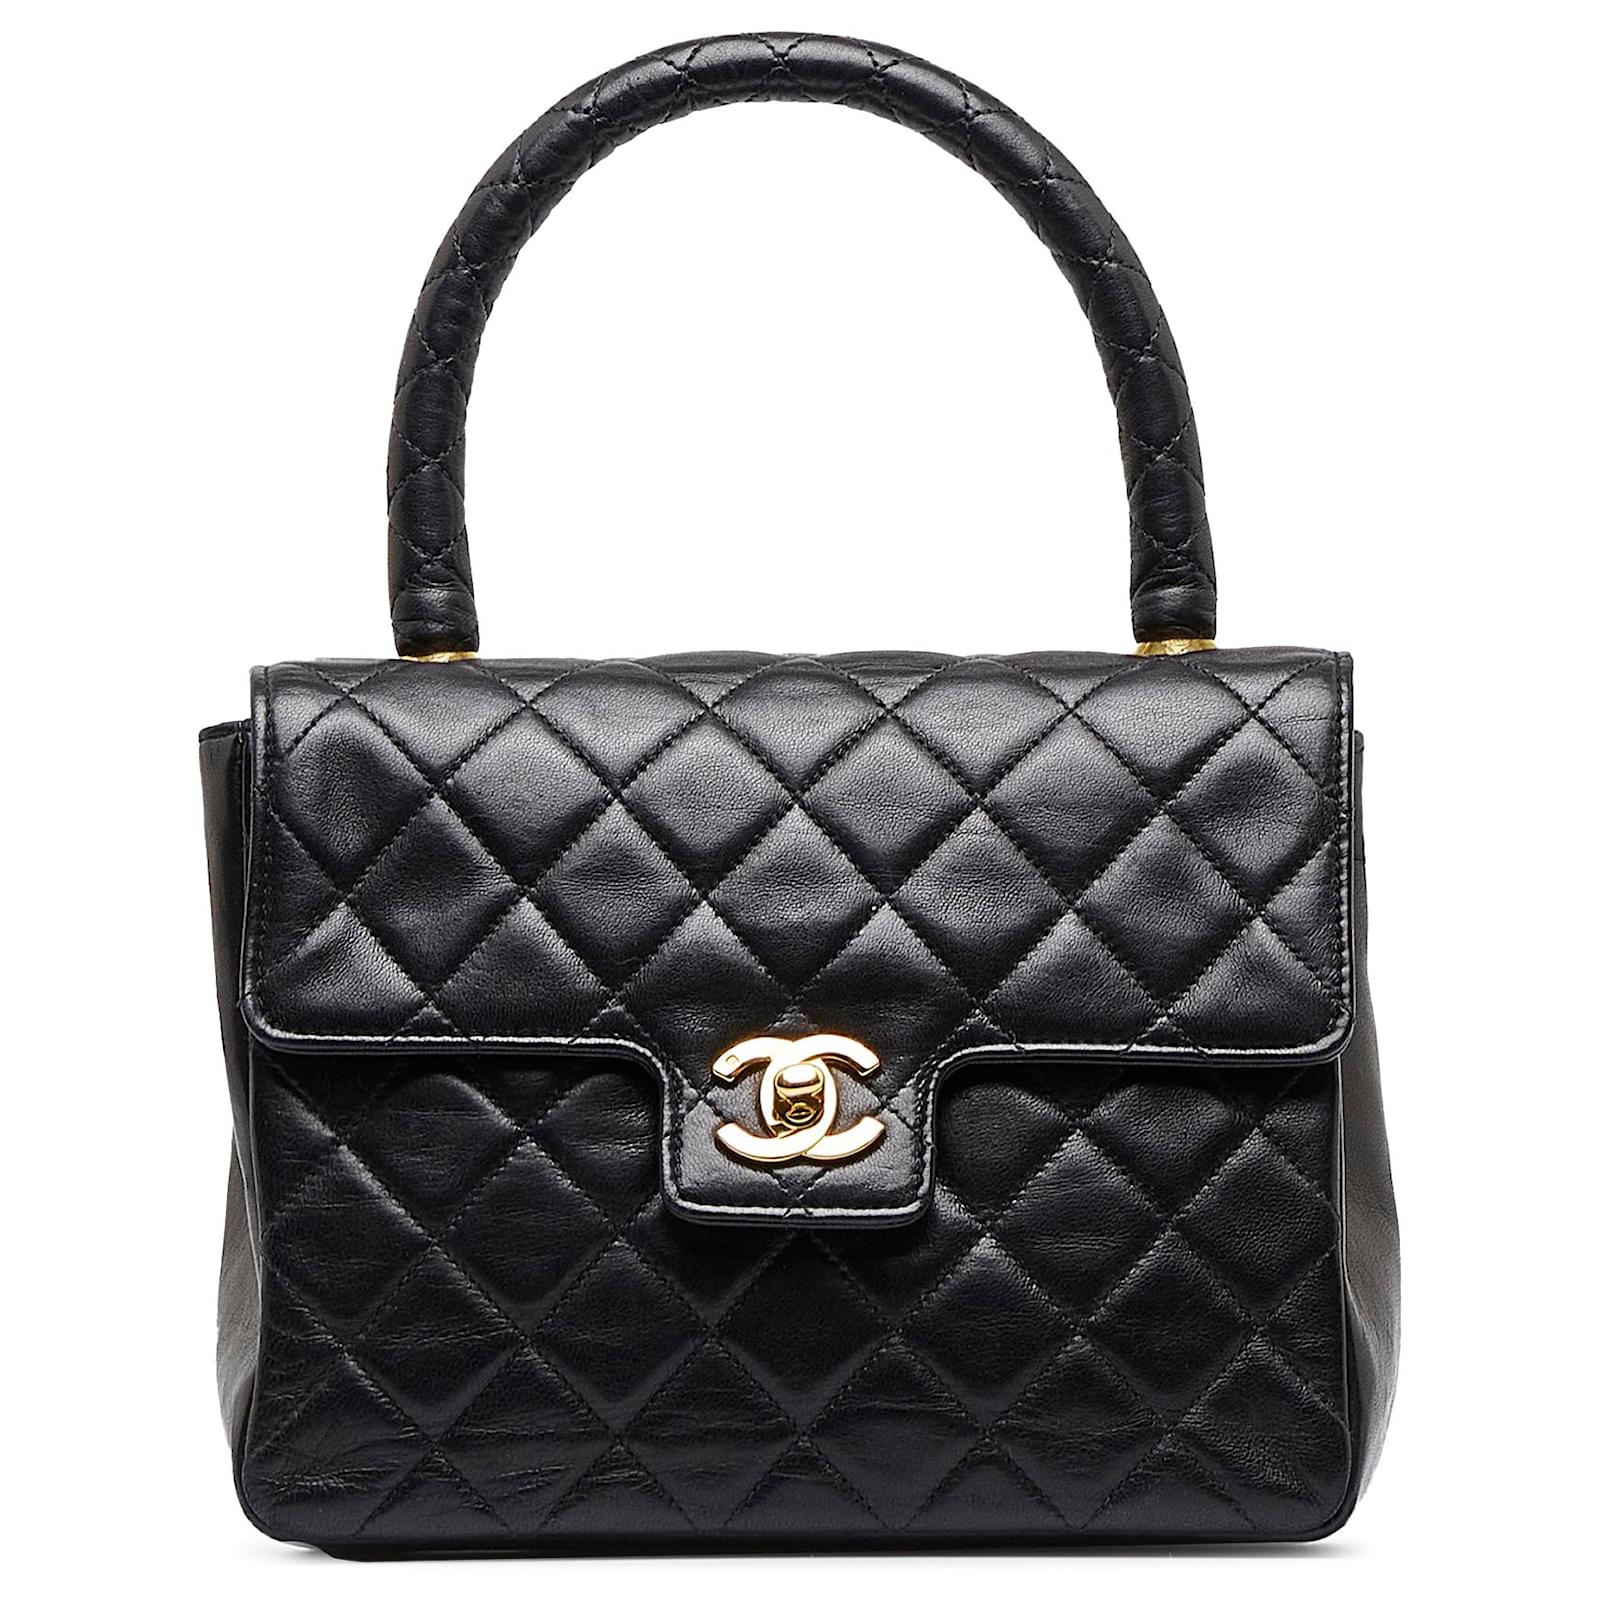 Chanel Vintage Quilted Kelly Top Handle Bag Lambskin Black Small Bag